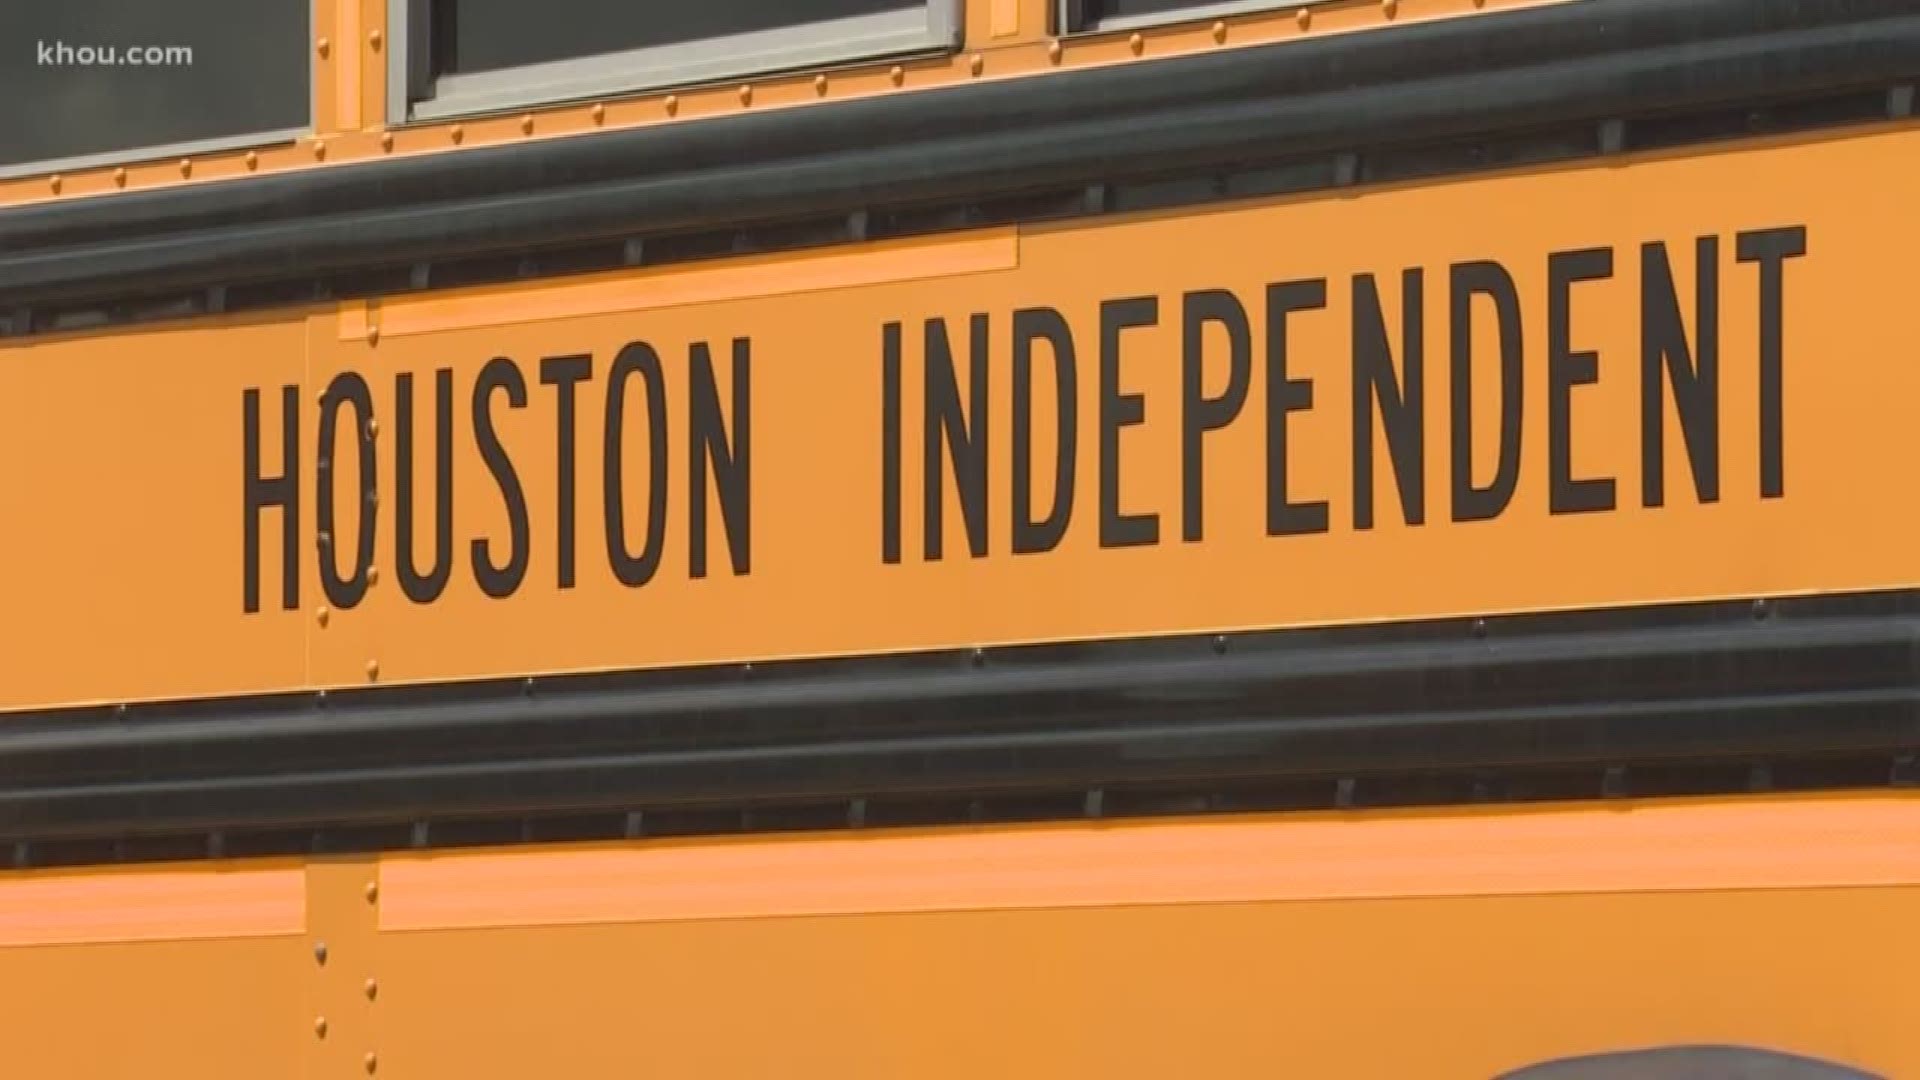 HISD received an overall grade of “B" and scored an 88 in the state's report card.